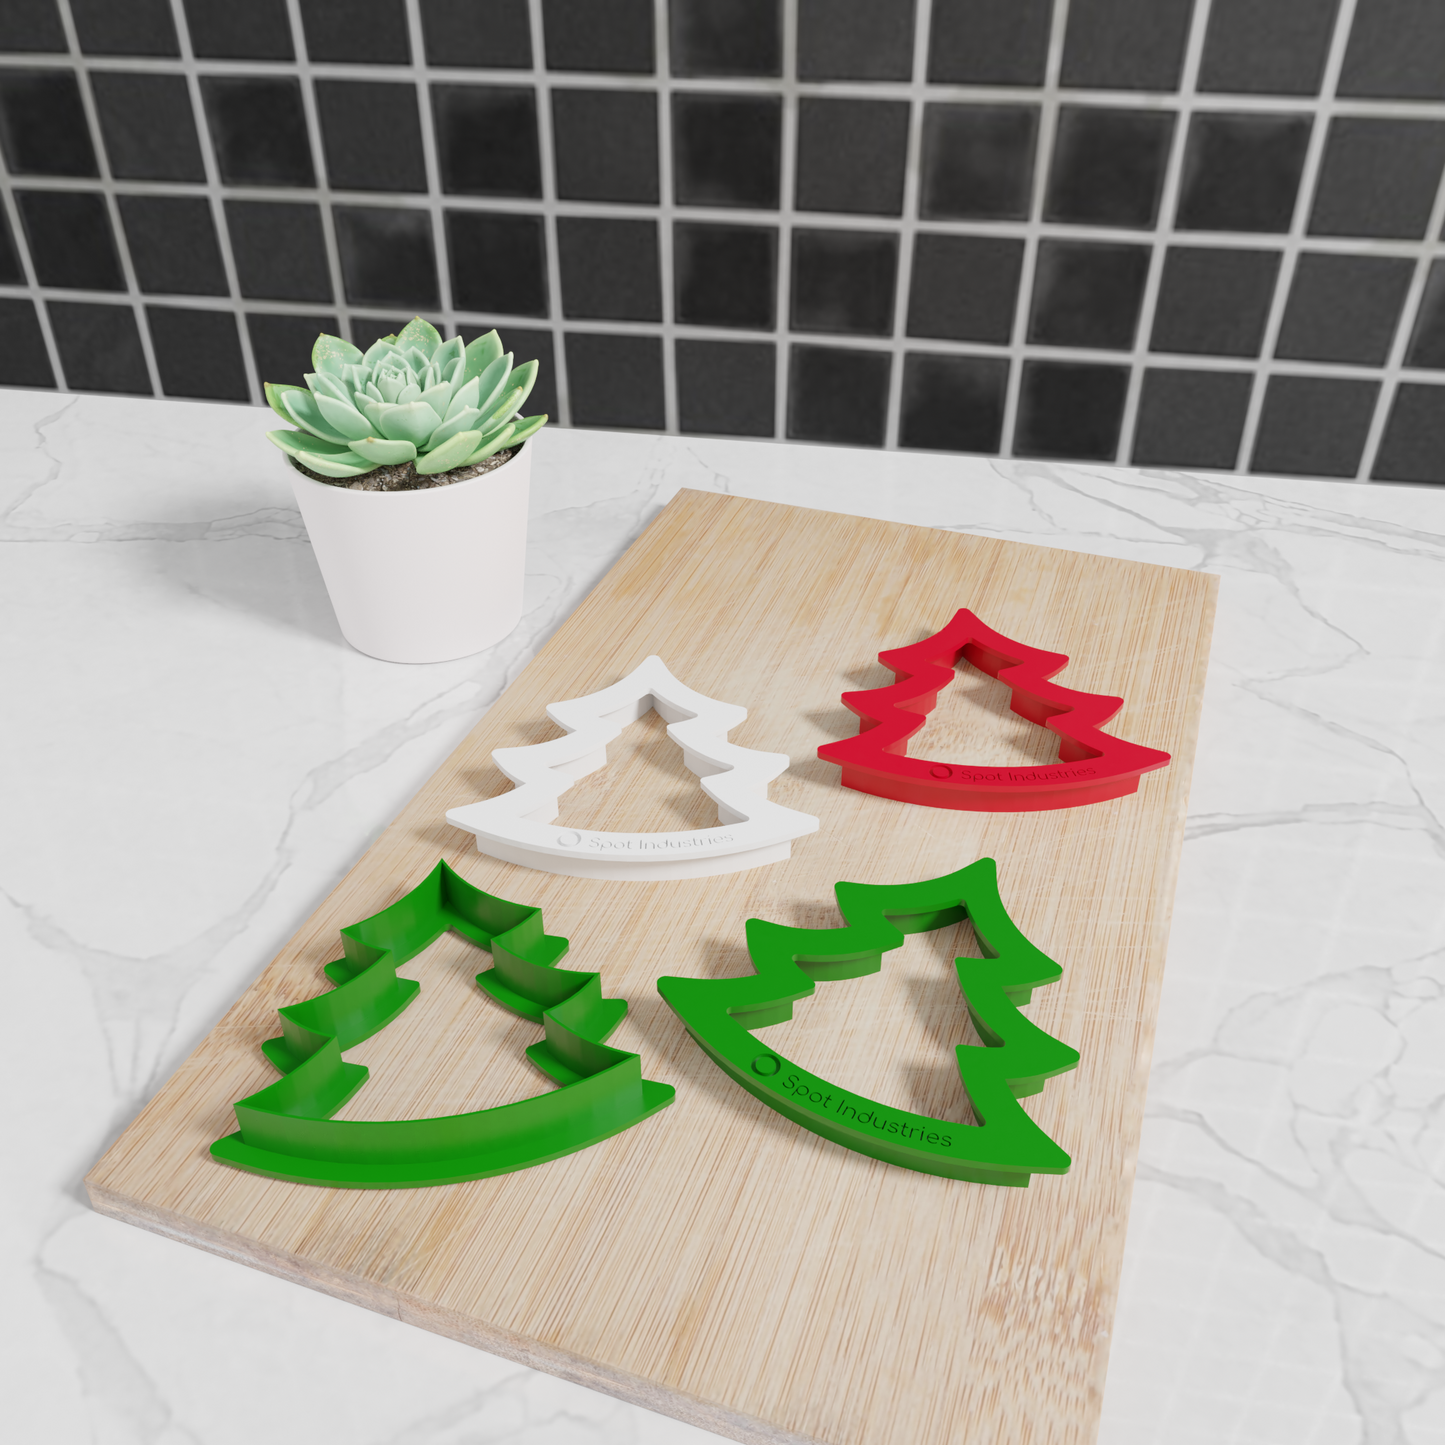 Easy Grip Christmas Tree Cookie Cutter Set For Kids & Adults! Custom Sizes, Multiple Colors. Work As Clay Cutter And Fondant Cutter Too!